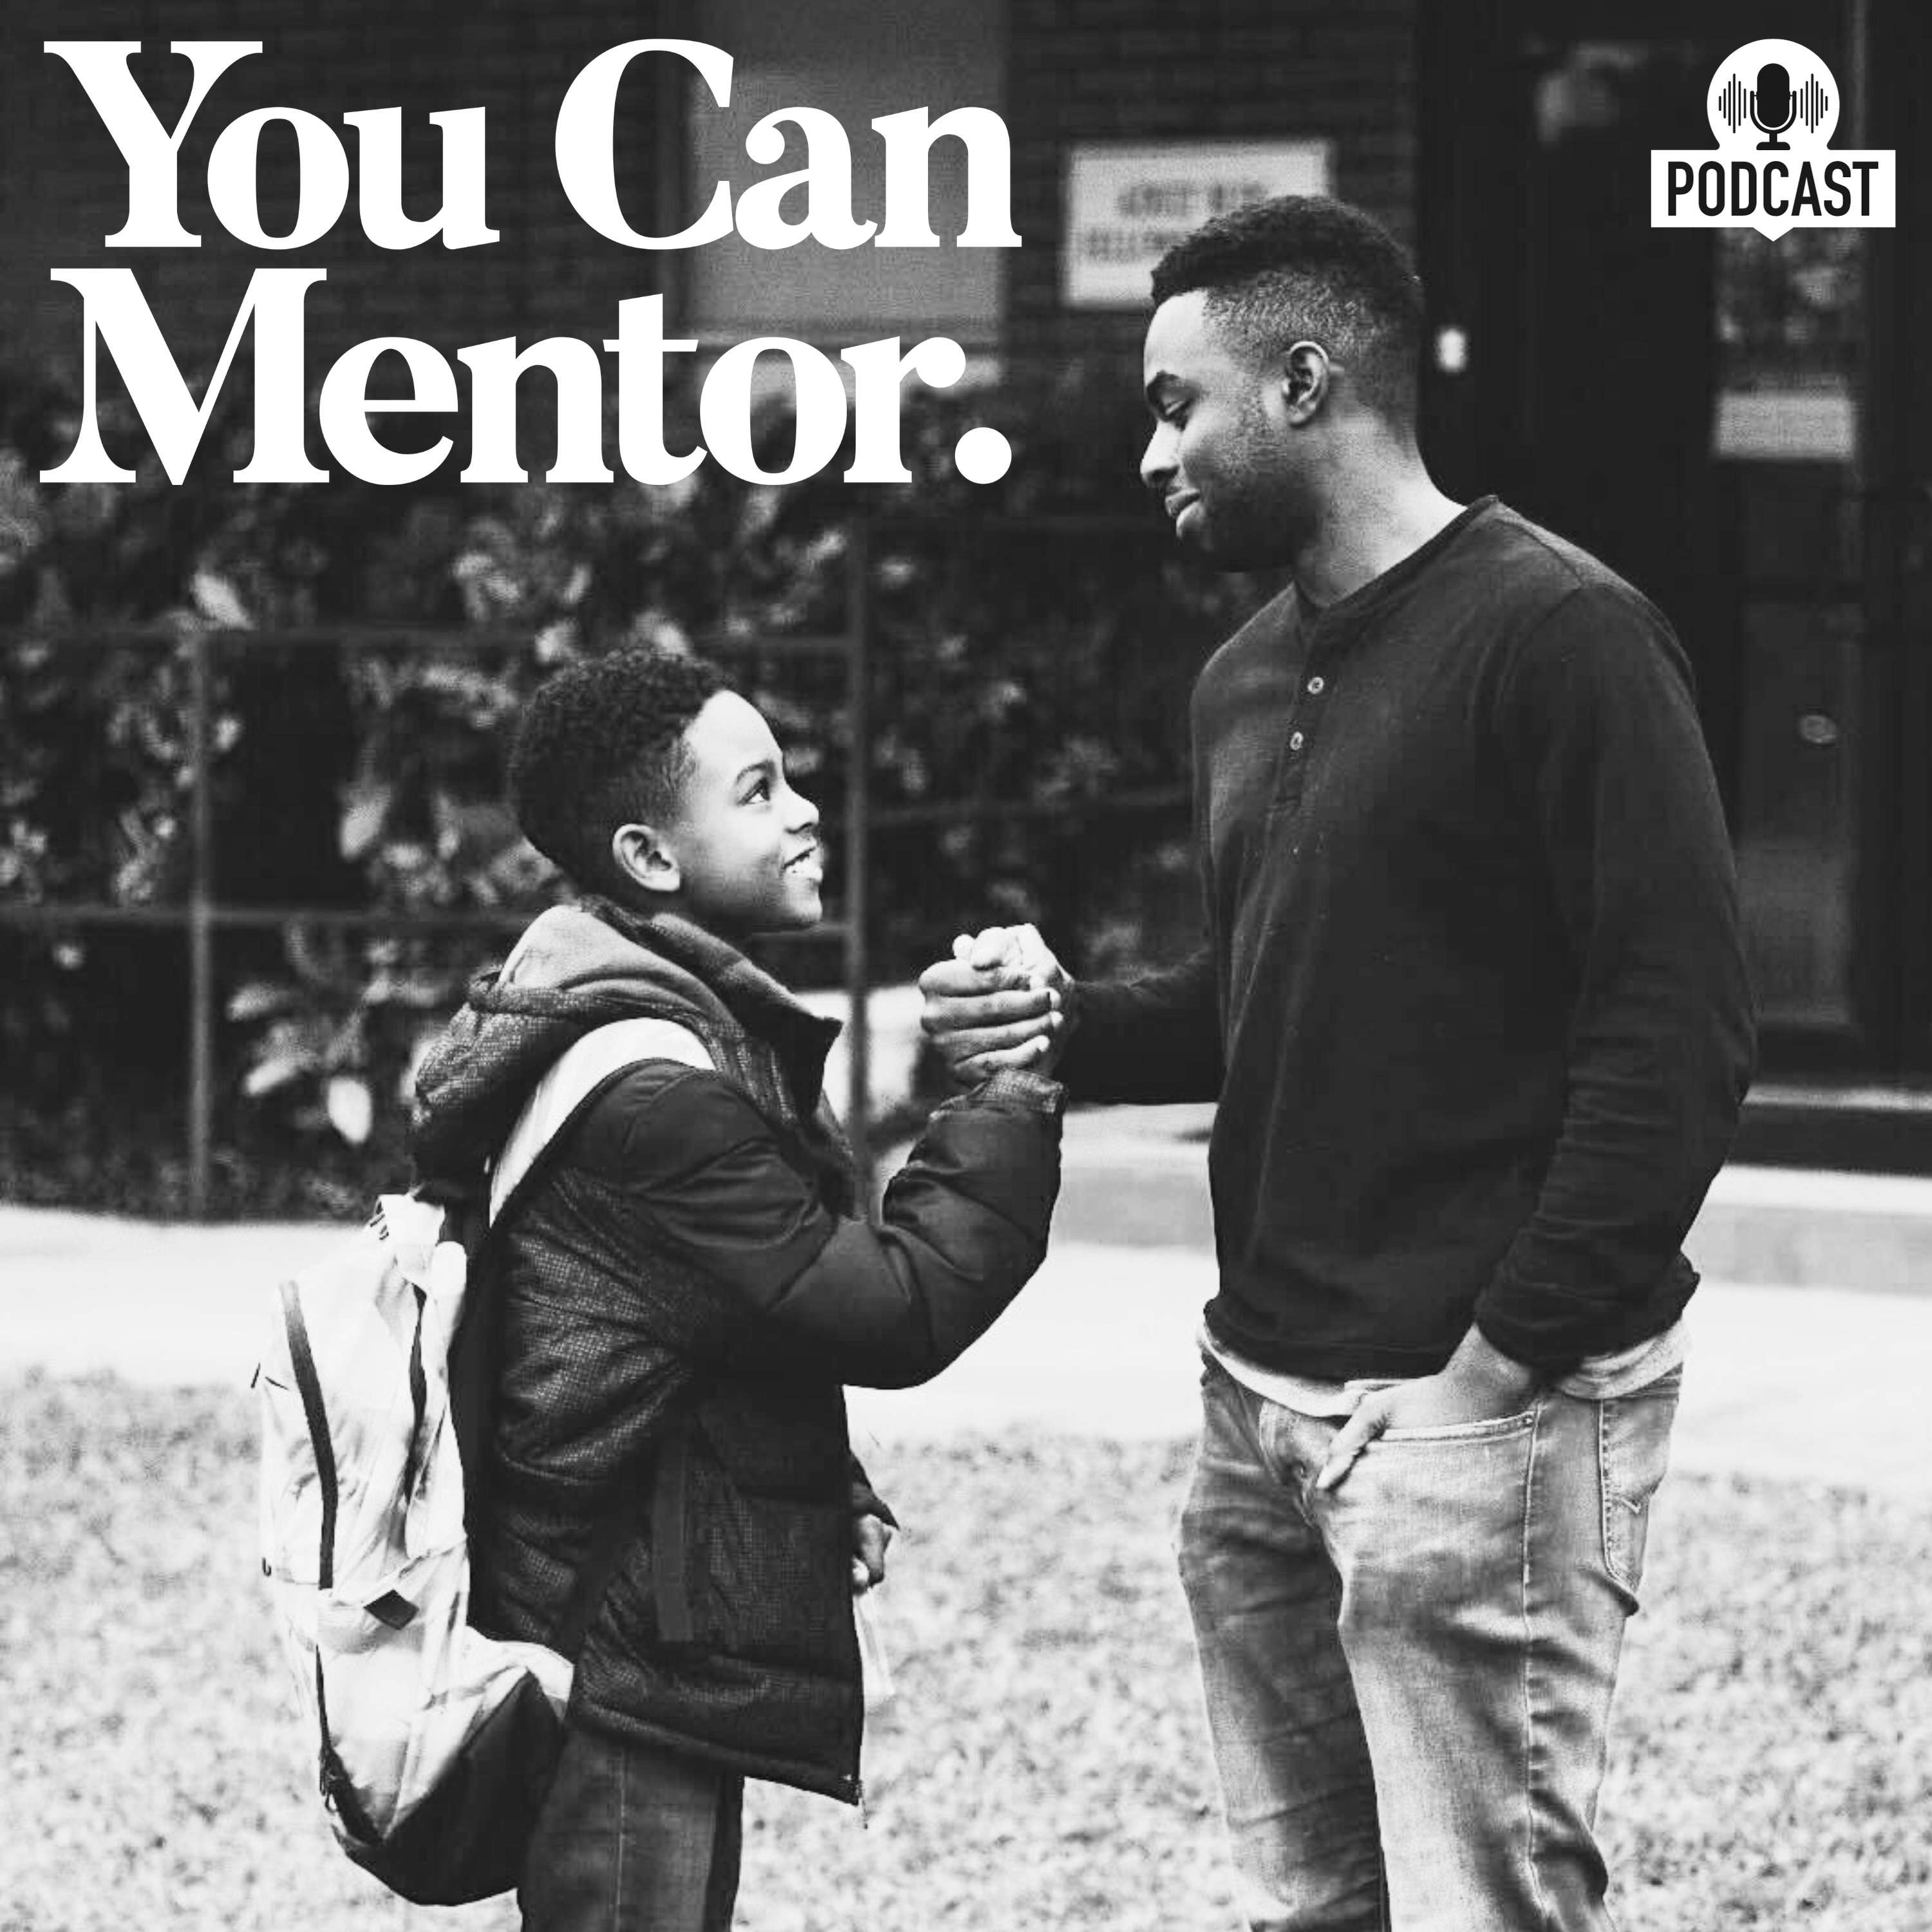 You Can Mentor: A Christian Mentoring Podcast